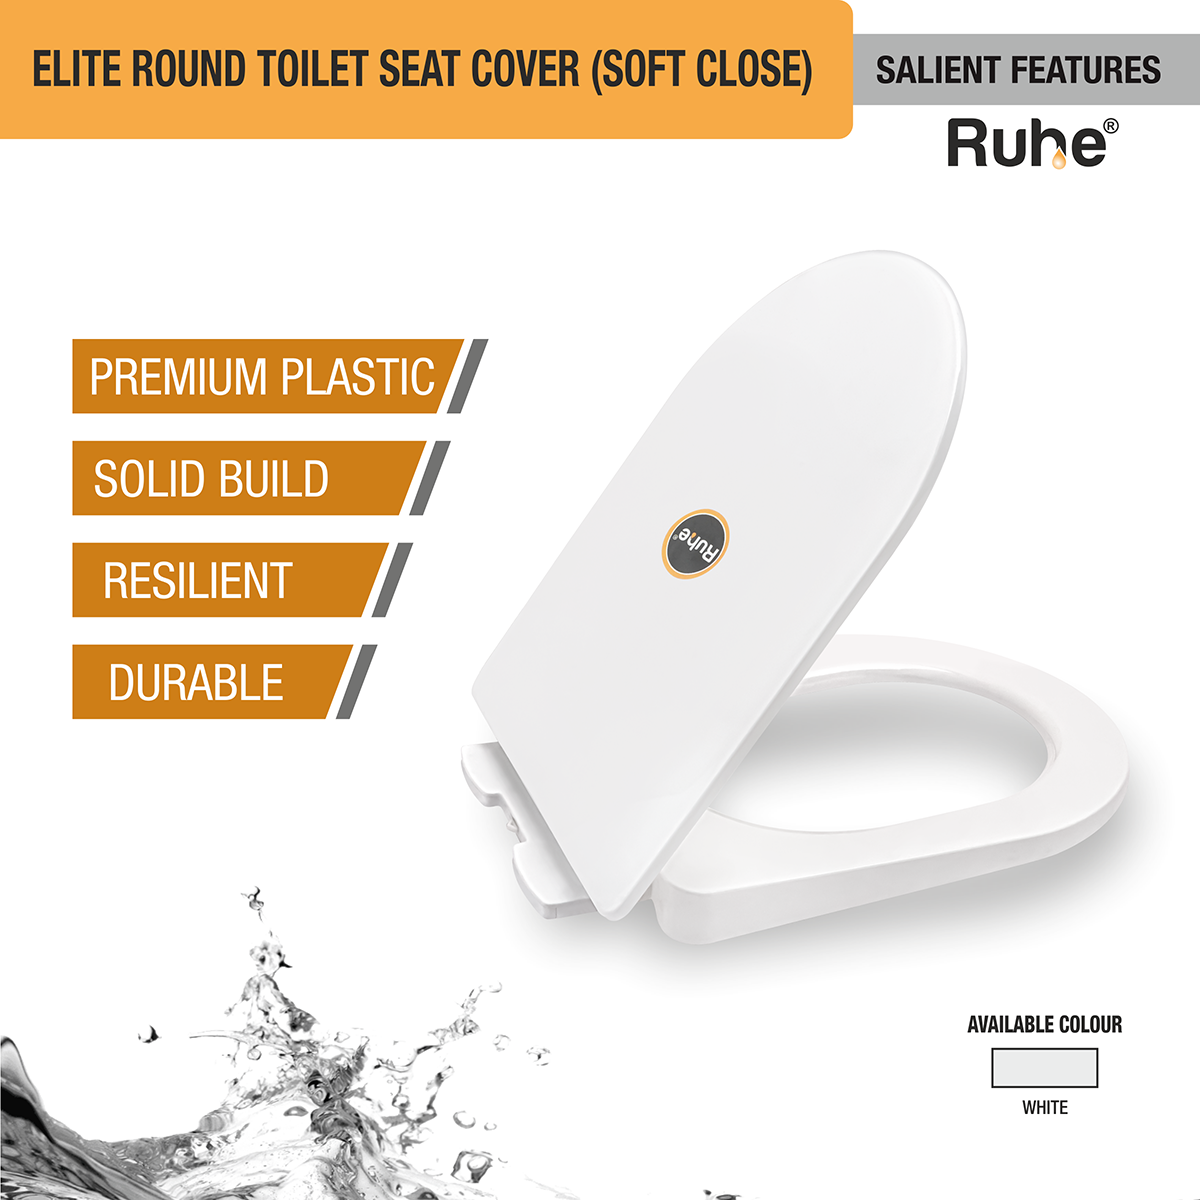 Elite Round Toilet Seat Cover (Soft Close) features and benefits